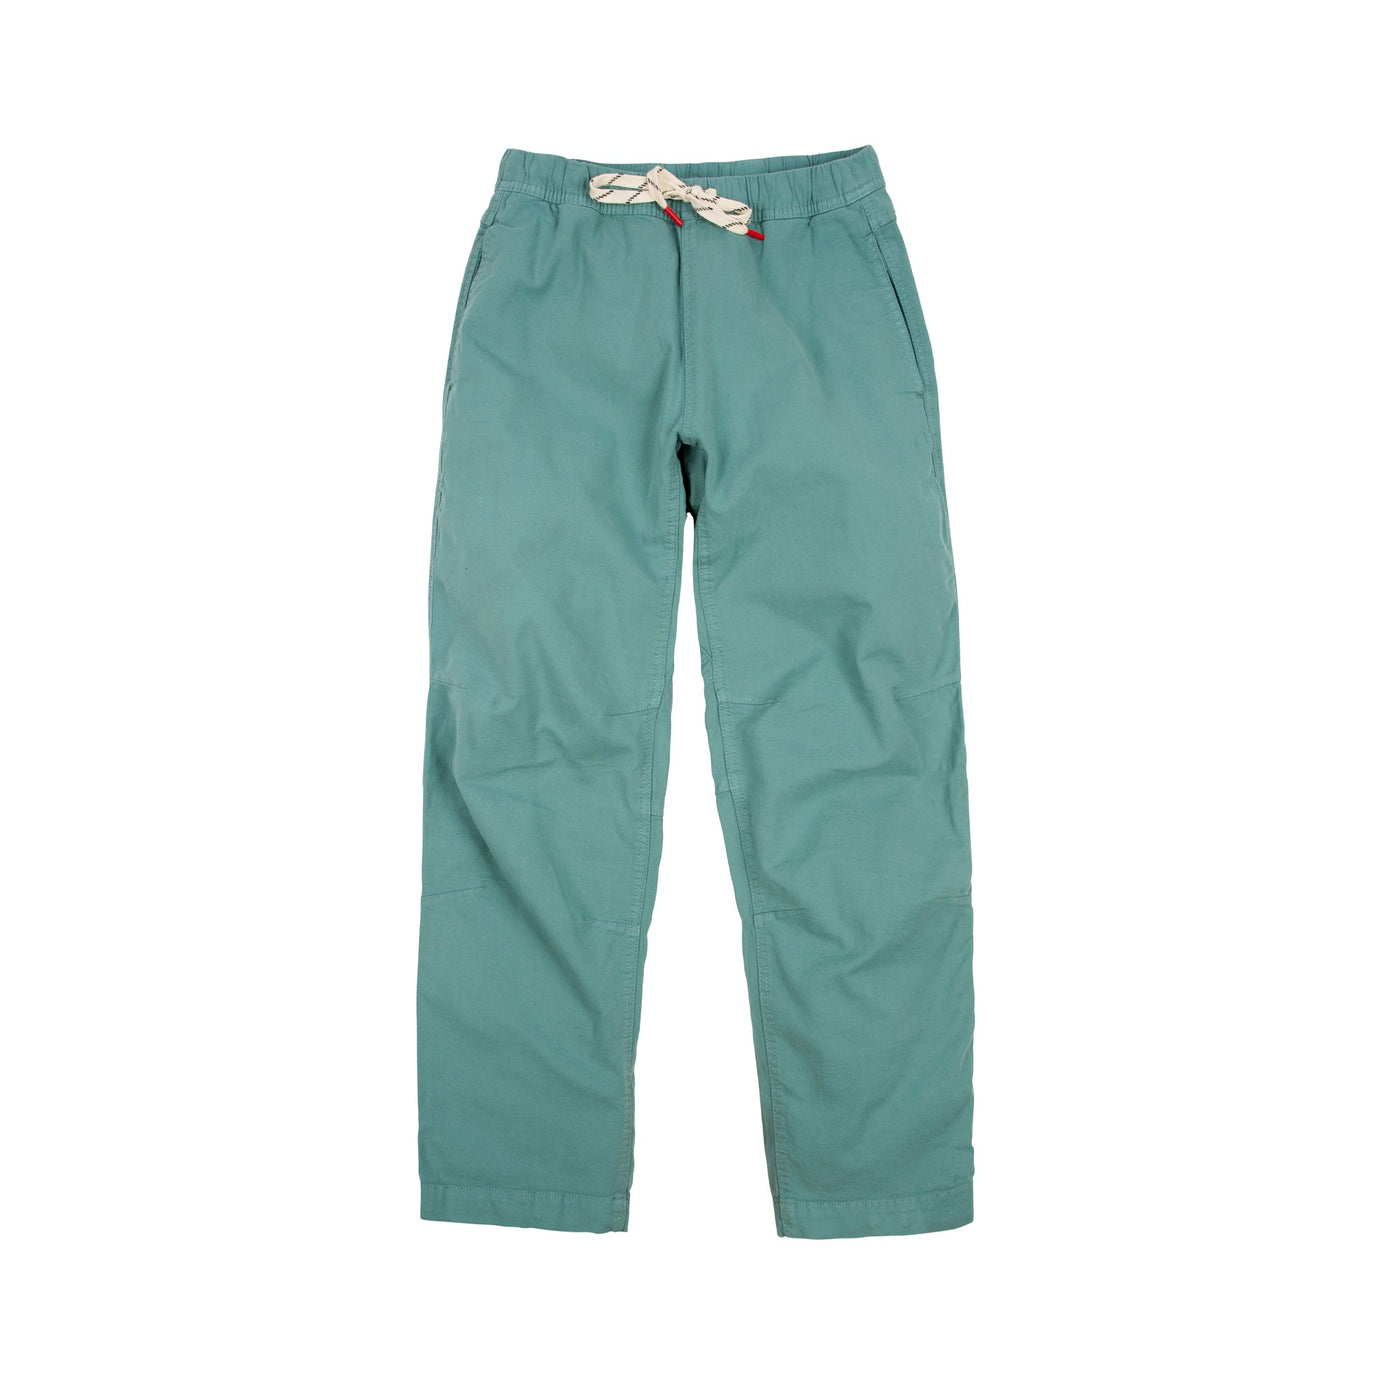 Front product shot of Topo Designs Women's Dirt Pants in "Sage" green.